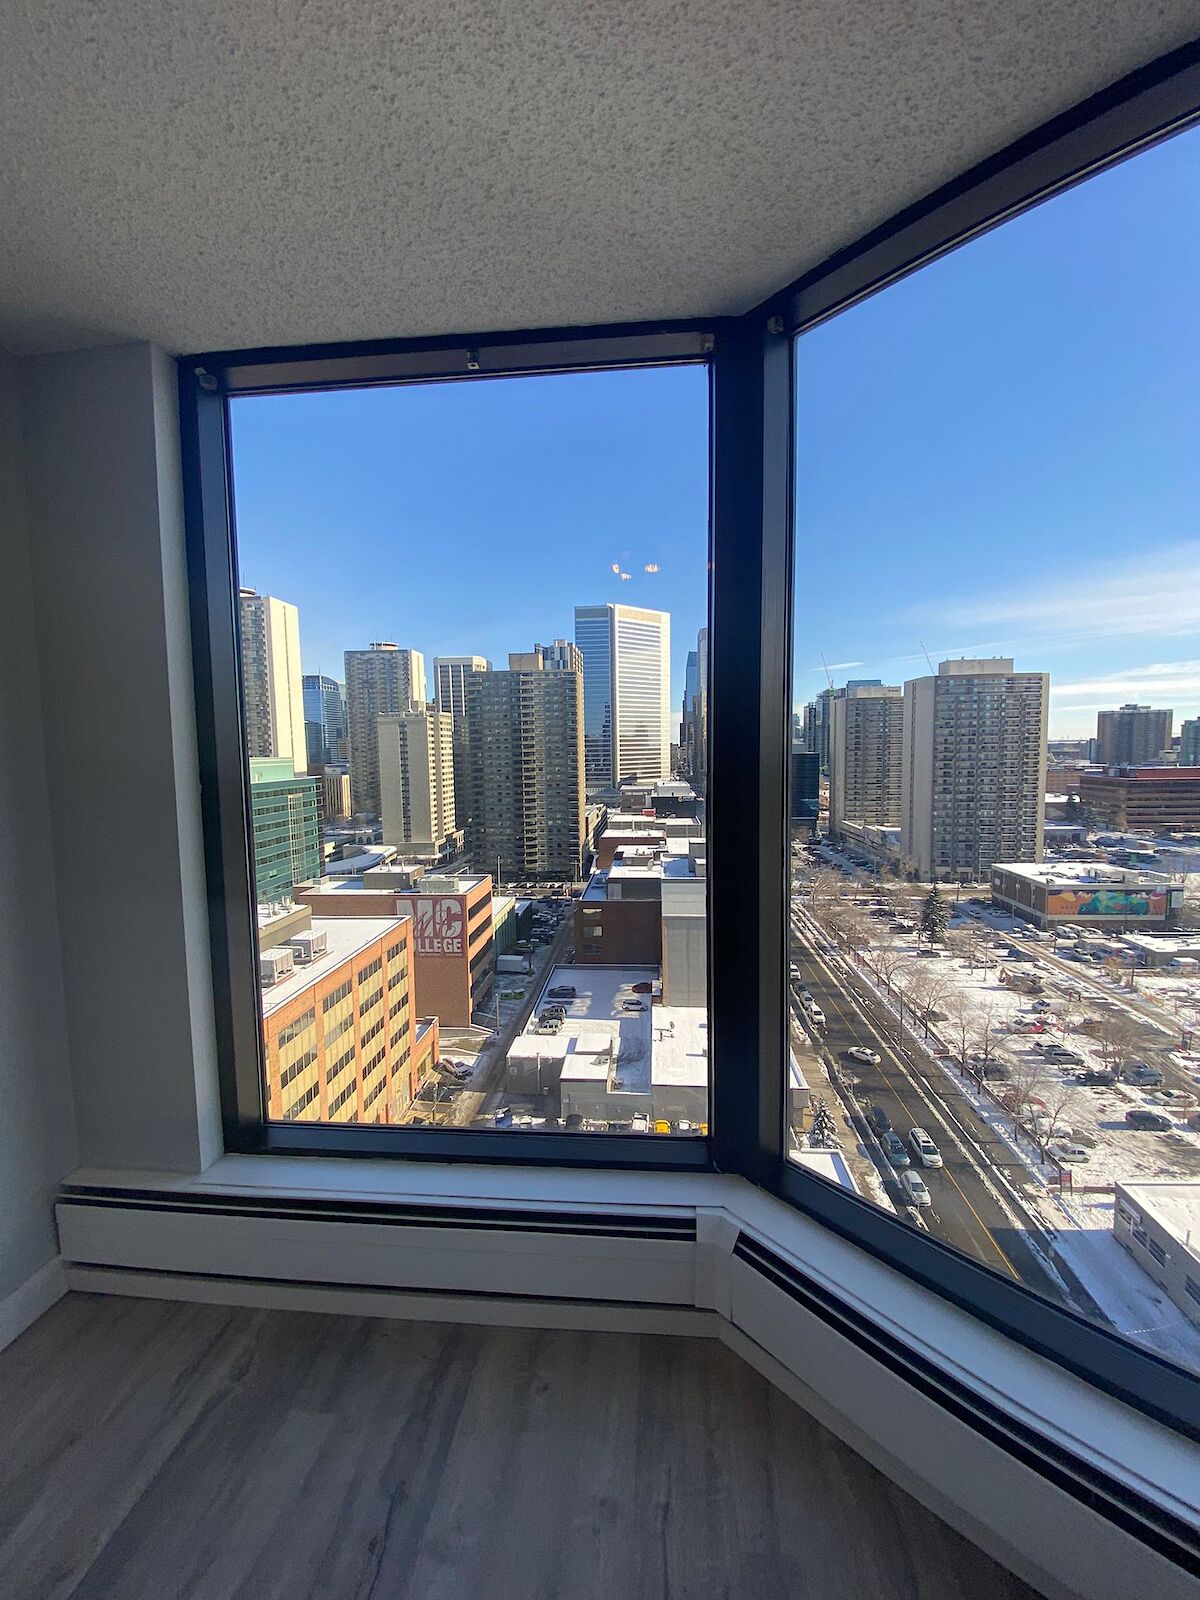 Calgary Condo Unit For Rent | Downtown | 17th Floor Luxurious over 1400